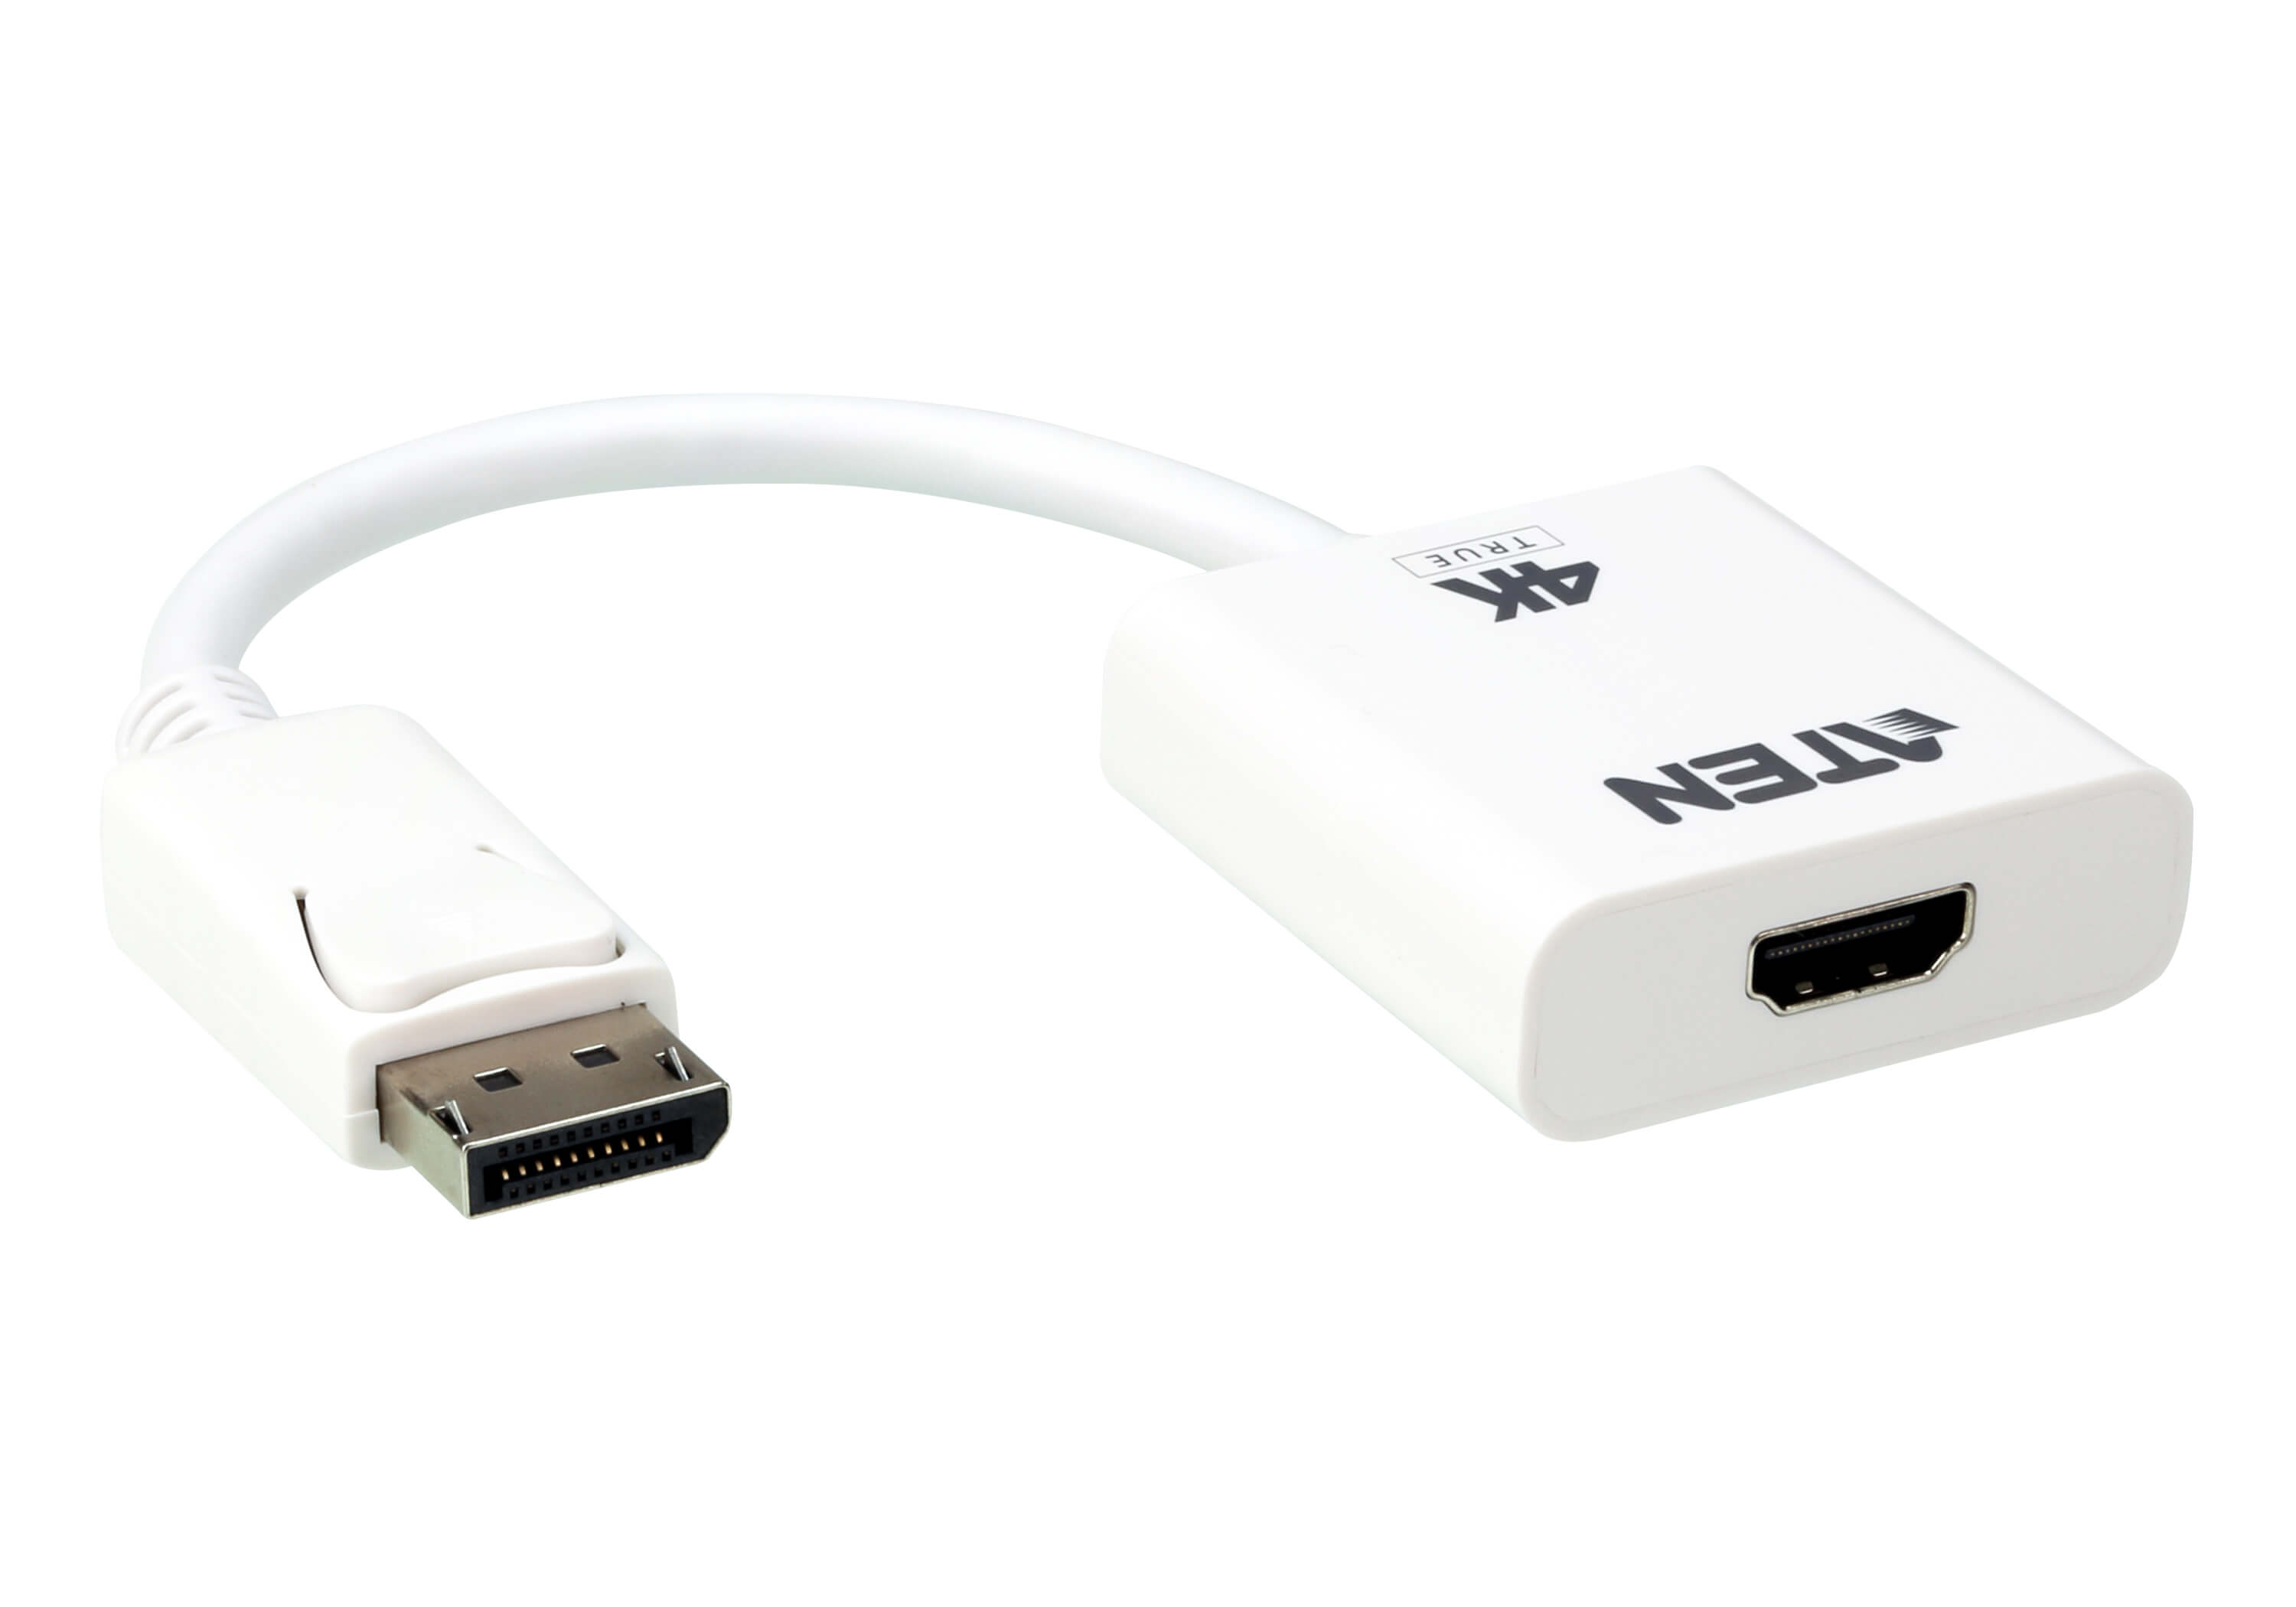 Aten VanCryst VC986B DisplayPort to True 4K HDMI Active Adapter. Supports Audio and AMD Eyefinity Technology for Multi-Screen setup